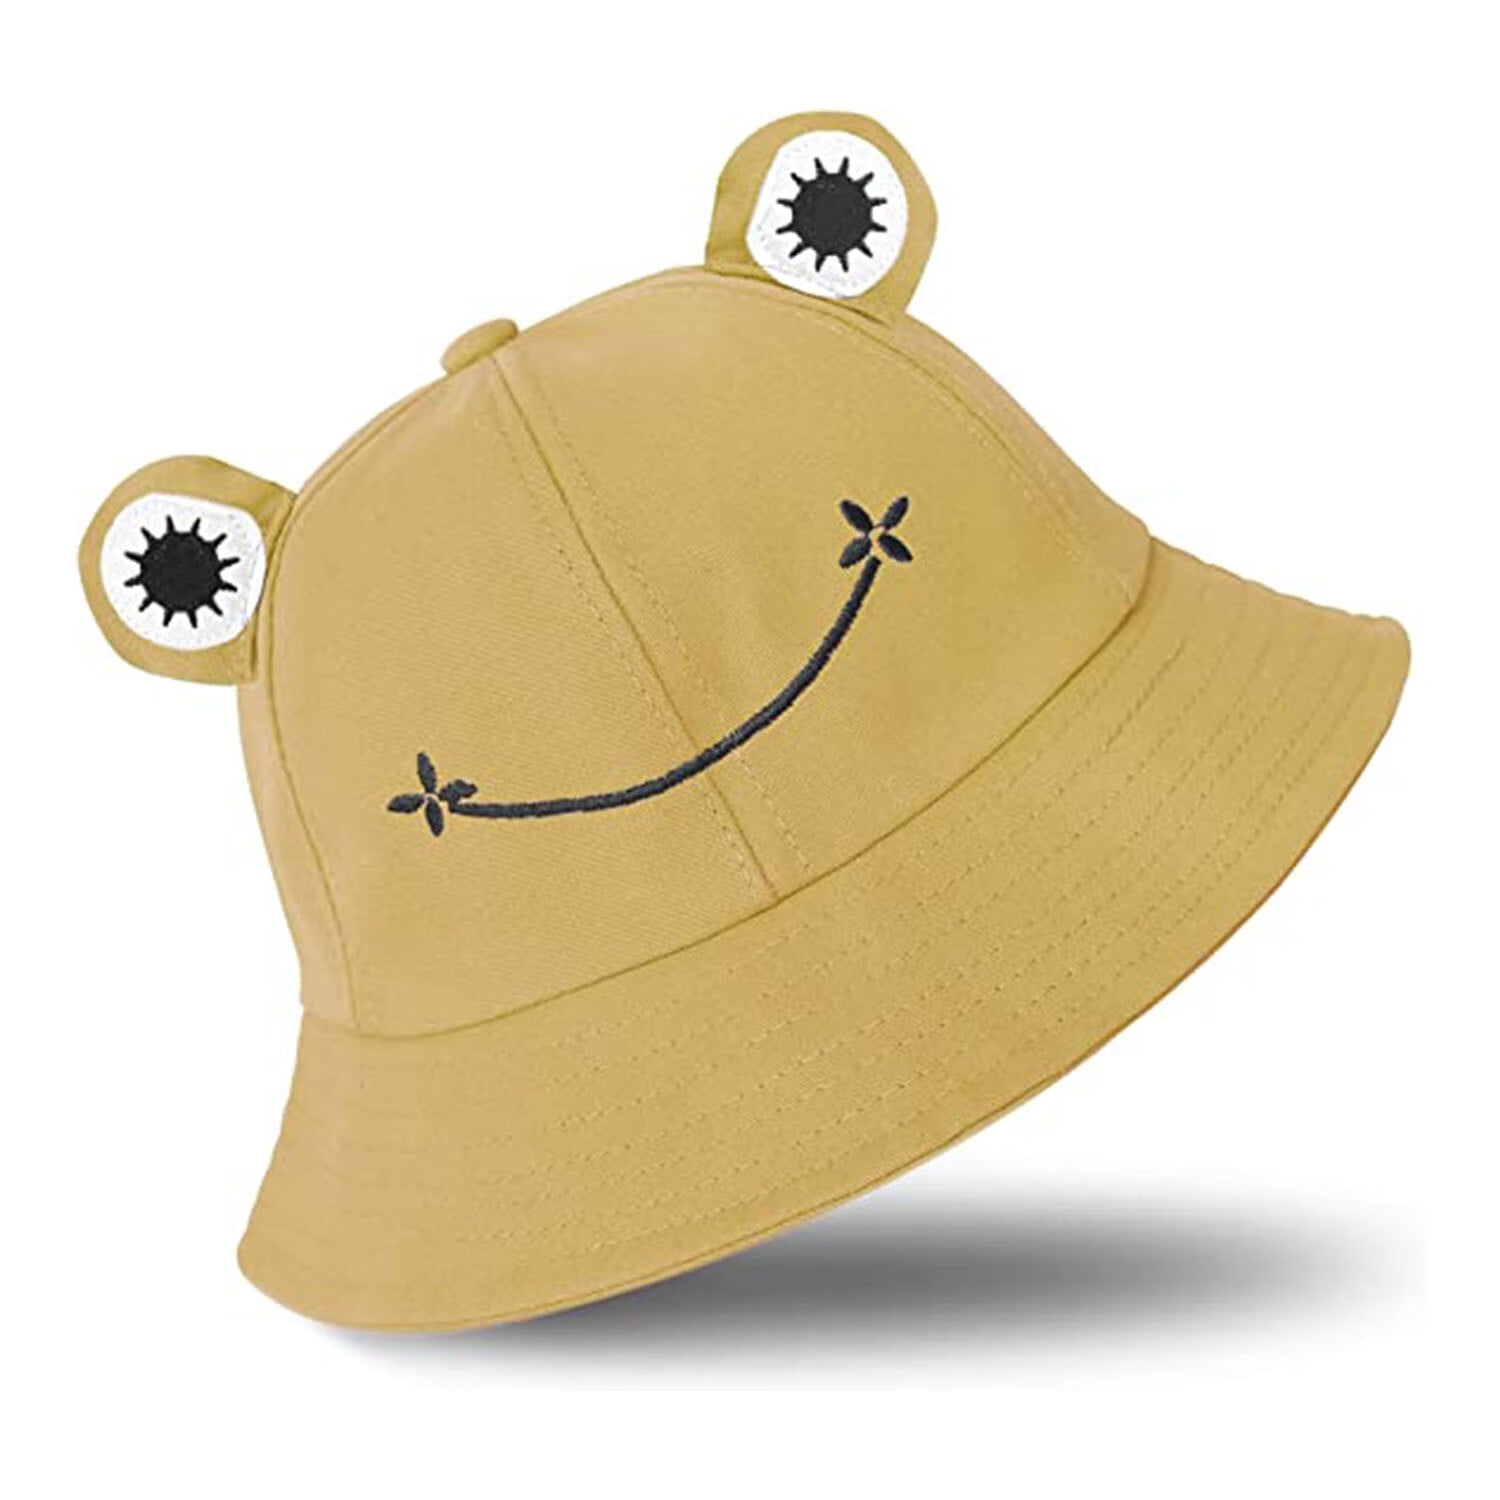 clberni Frog Hat for Adult Teens, Cute Frog Bucket Hat, Foldable Cotton Bucket Hat Funny Hat Fisherman Hat for Men Women Yellow, Adult Unisex, Size